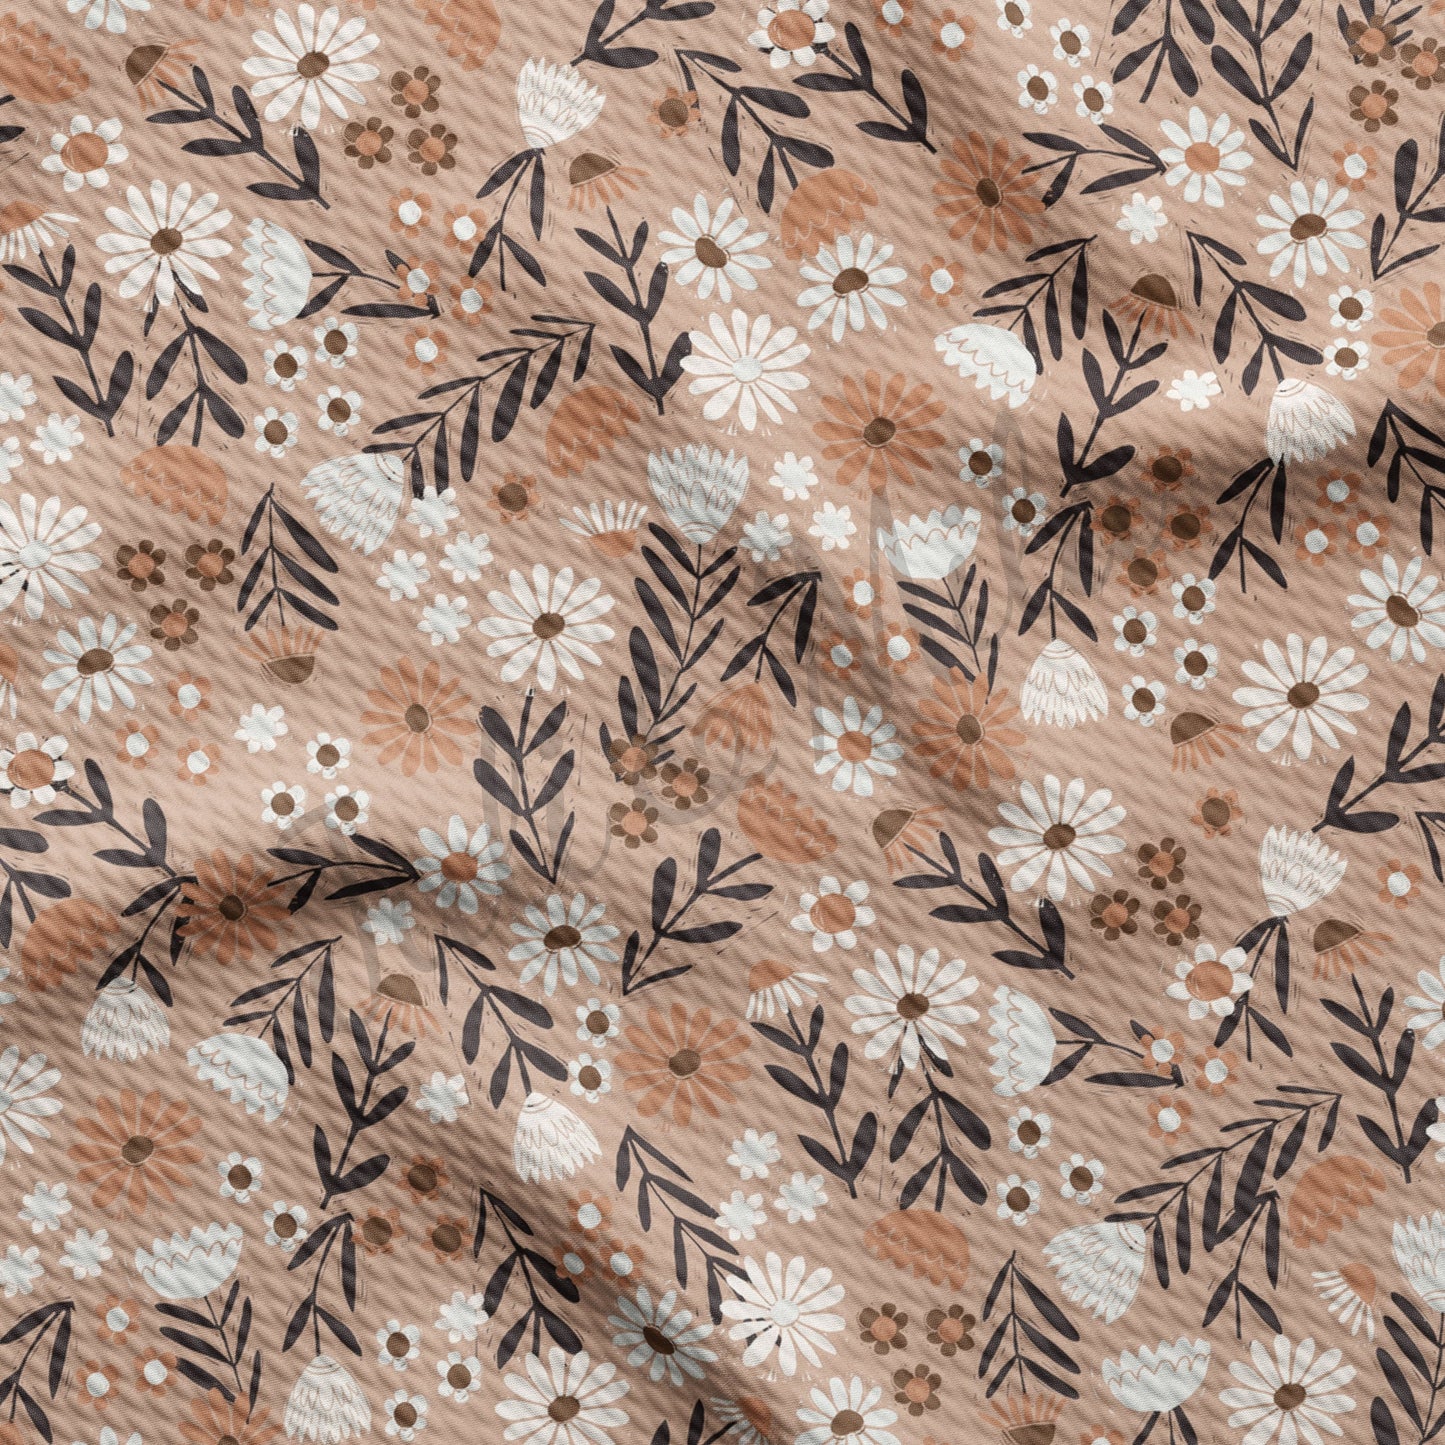 Bullet Textured Fabric Floral112